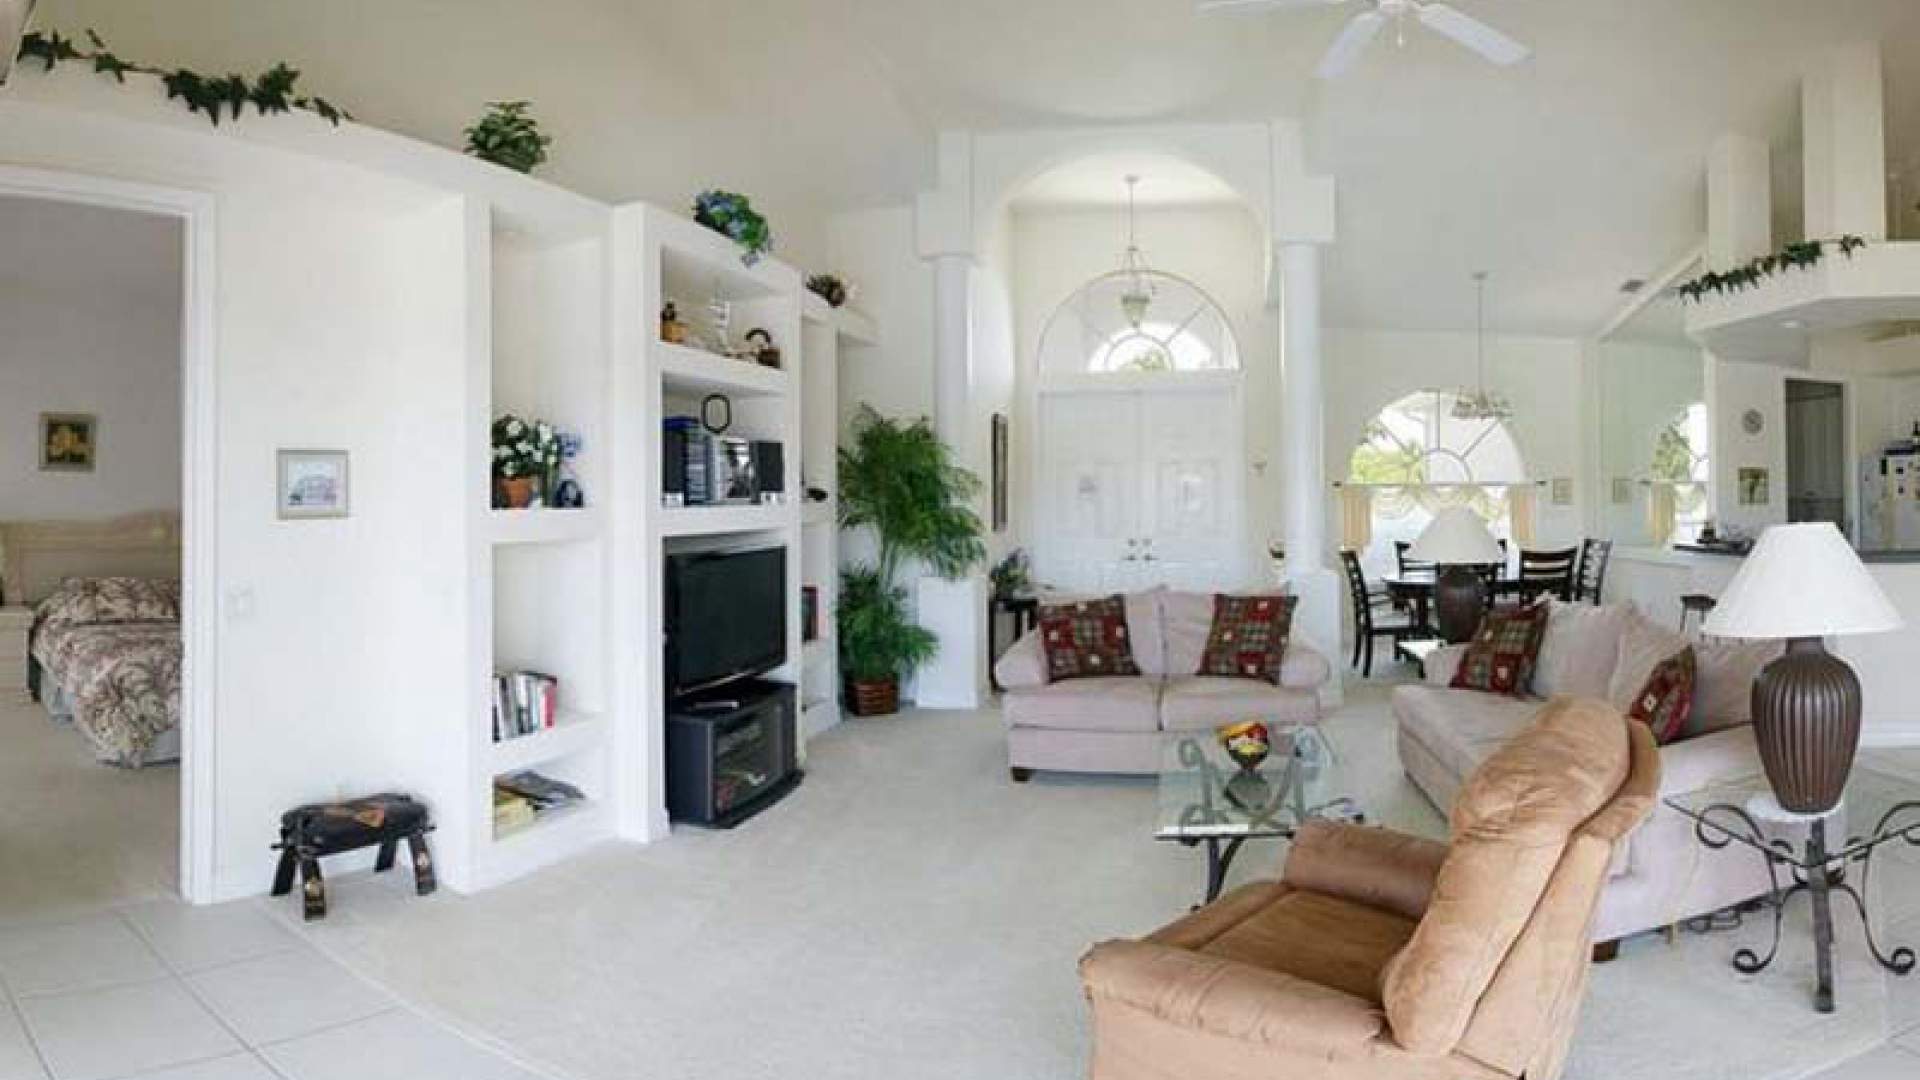 The spacious living room offers comfortable seating for six